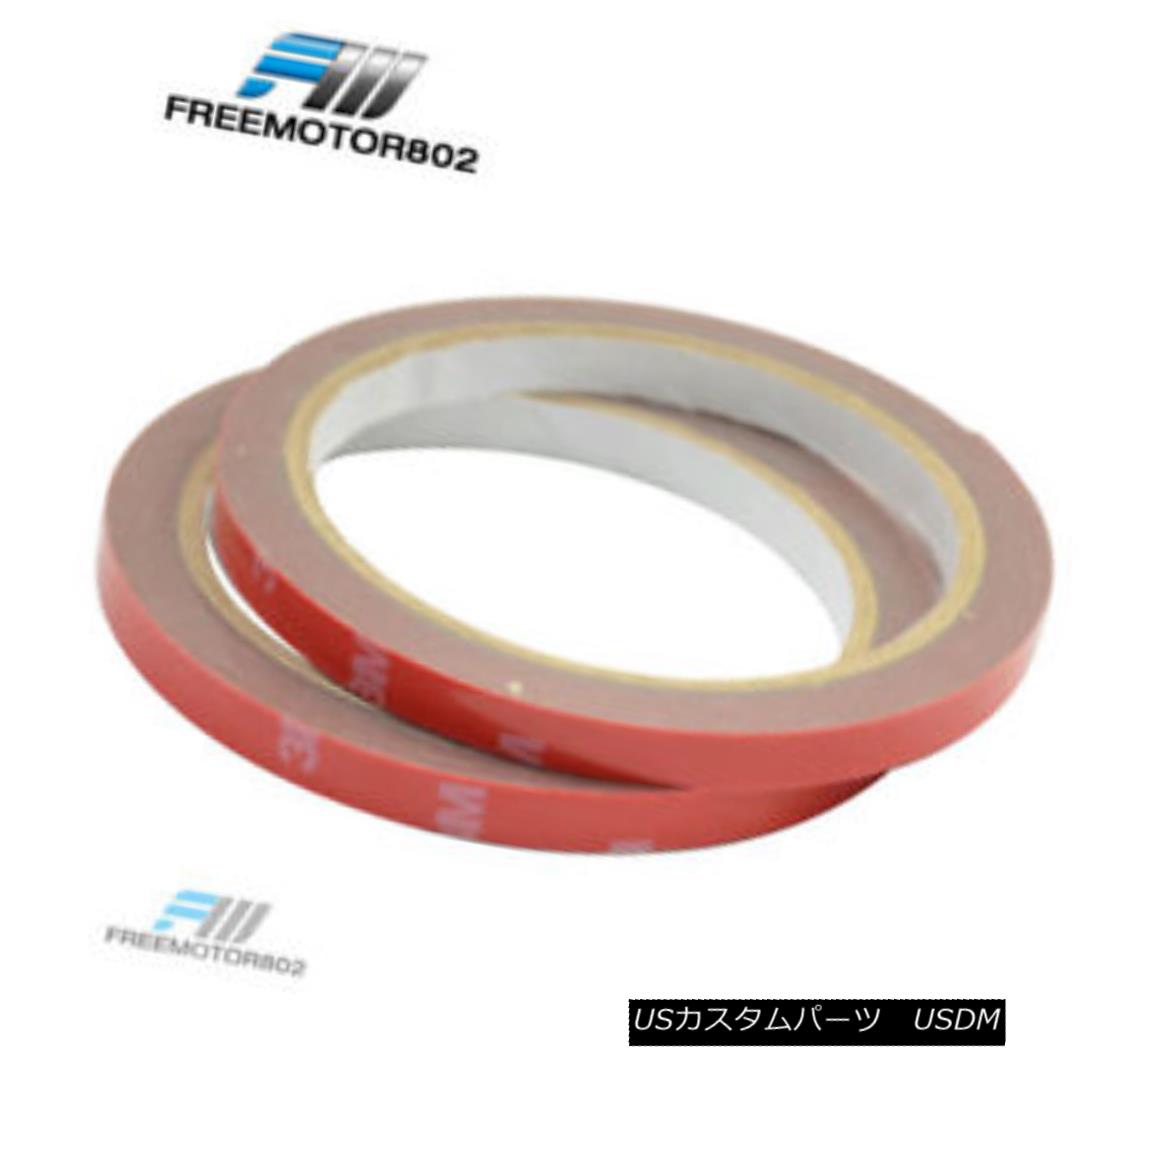 ѡ 3M Double Sided Strong Adhesive Tape Acrylic Foam 90 Inch L 0.3 Inch W 2 Roll 3Mξ̶Ǵơץե90L 0.3W 2